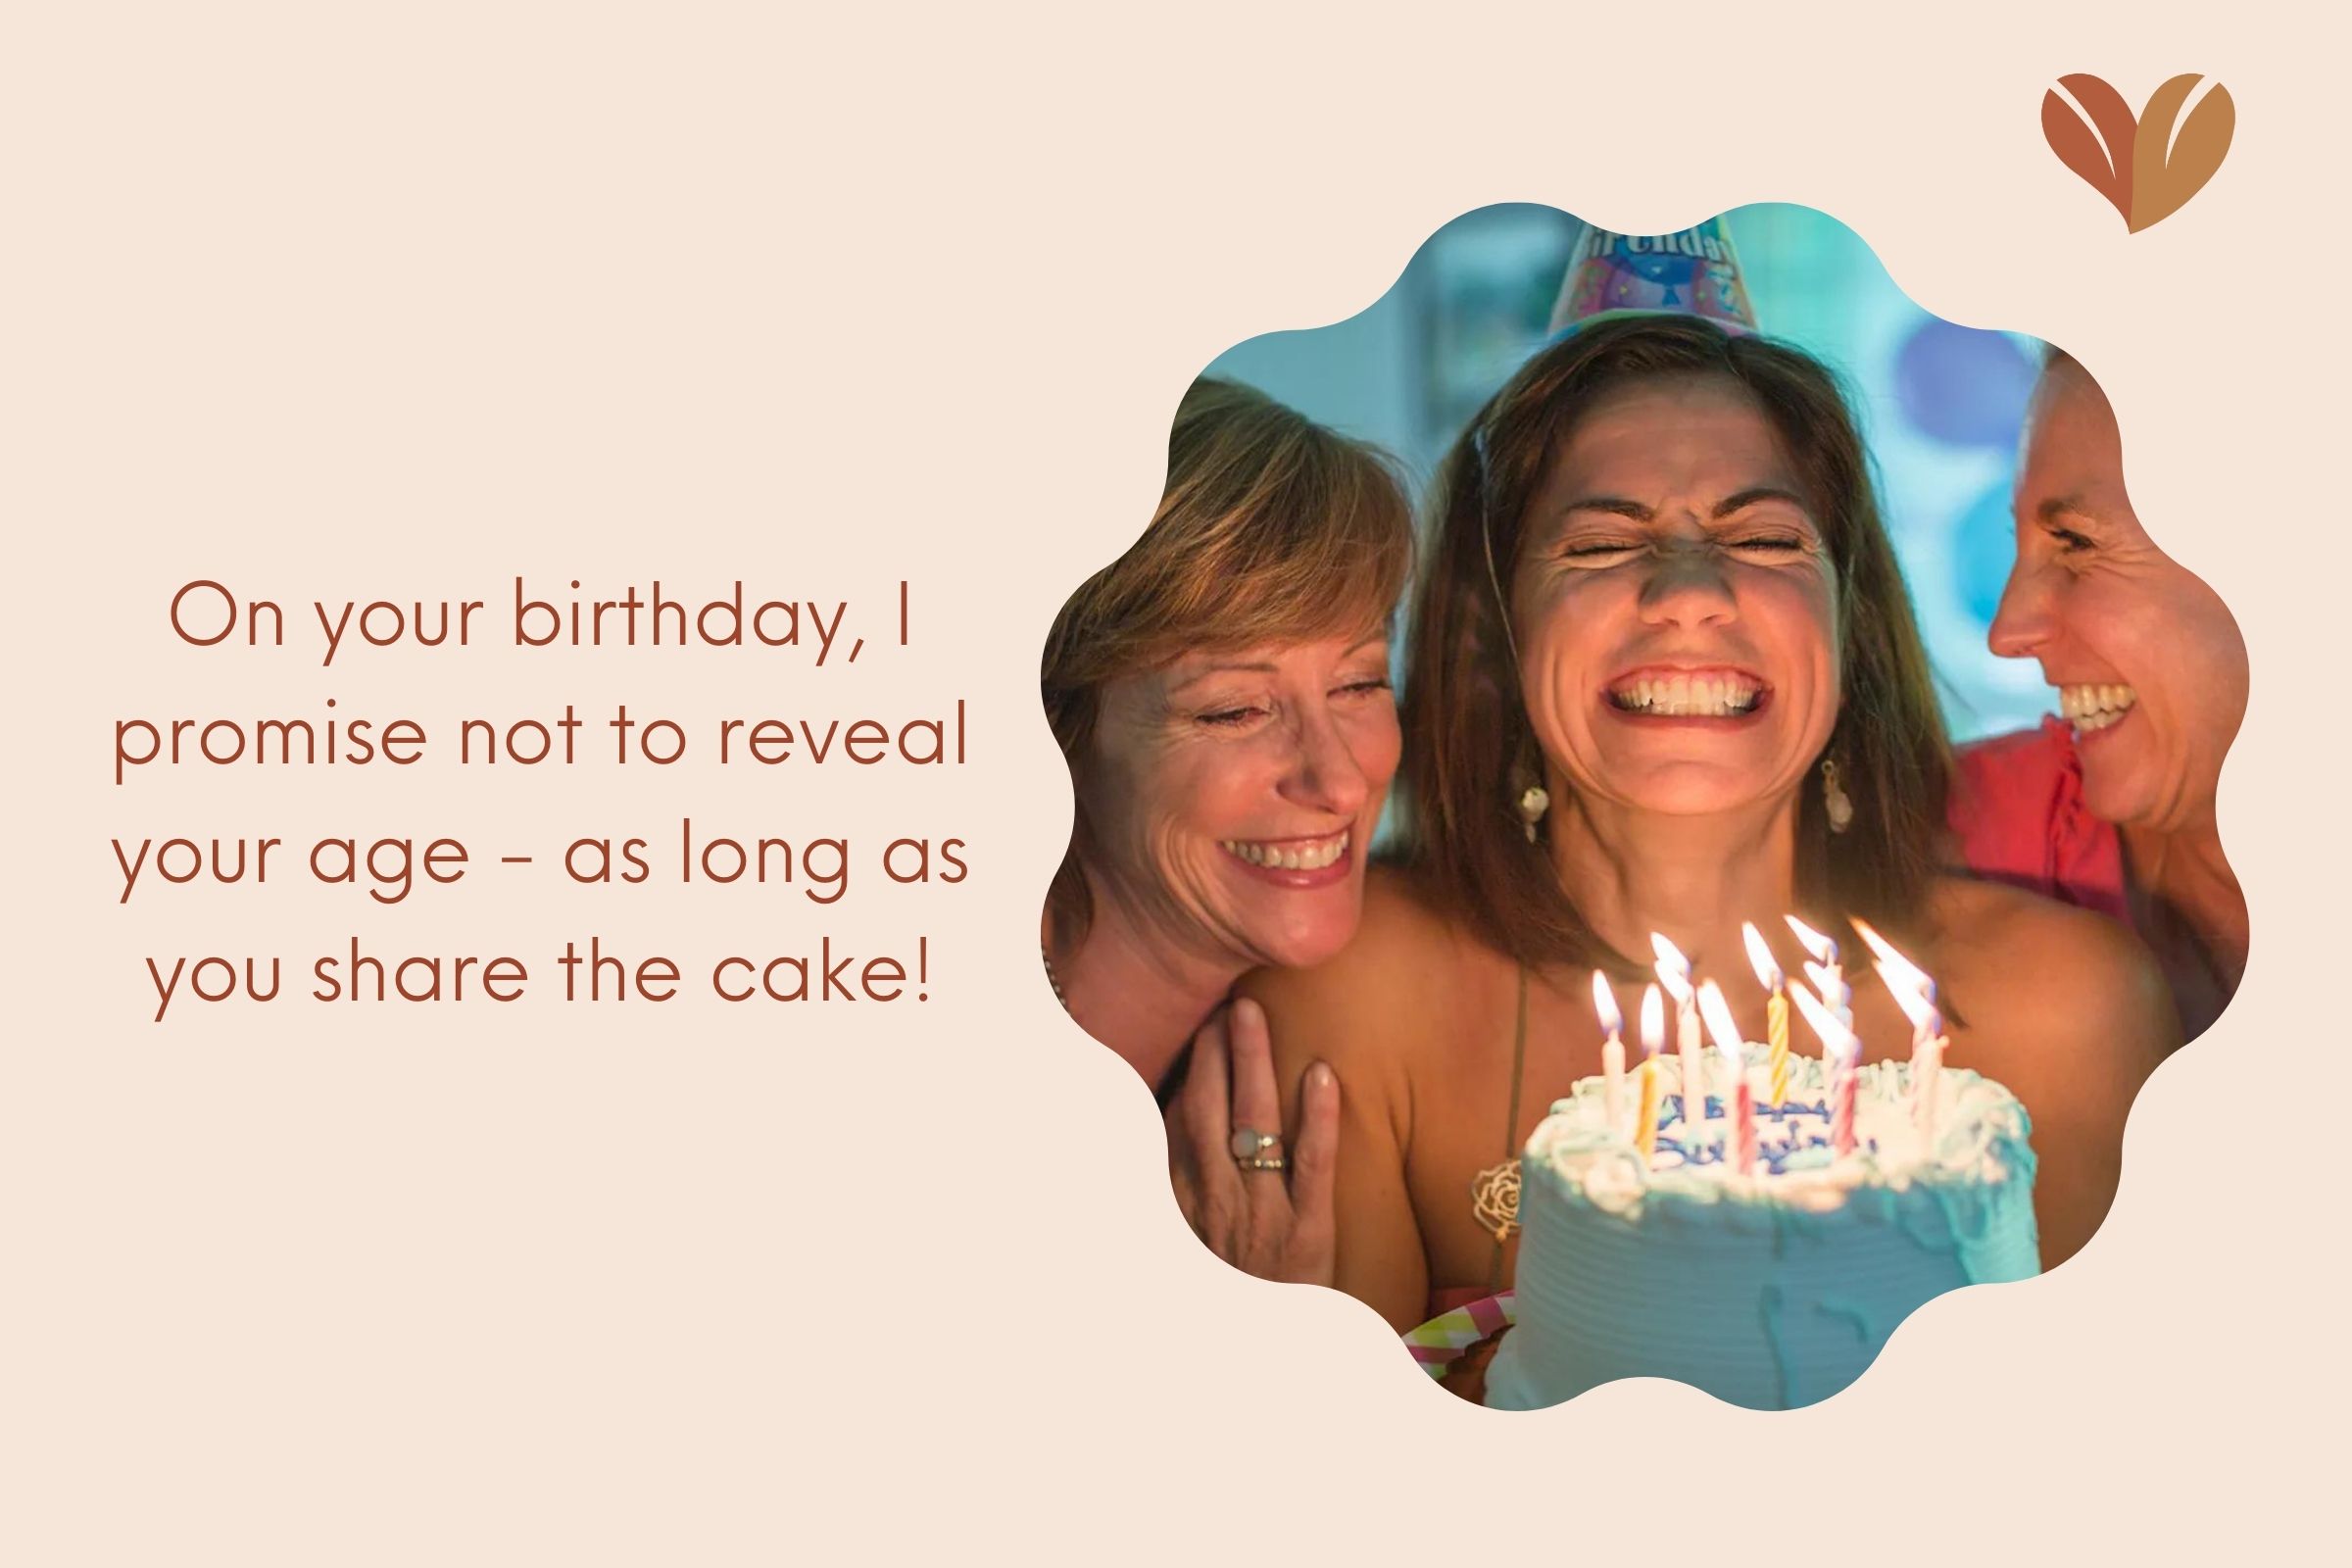 On your birthday, I promise not to reveal your age - as long as you share the cake!